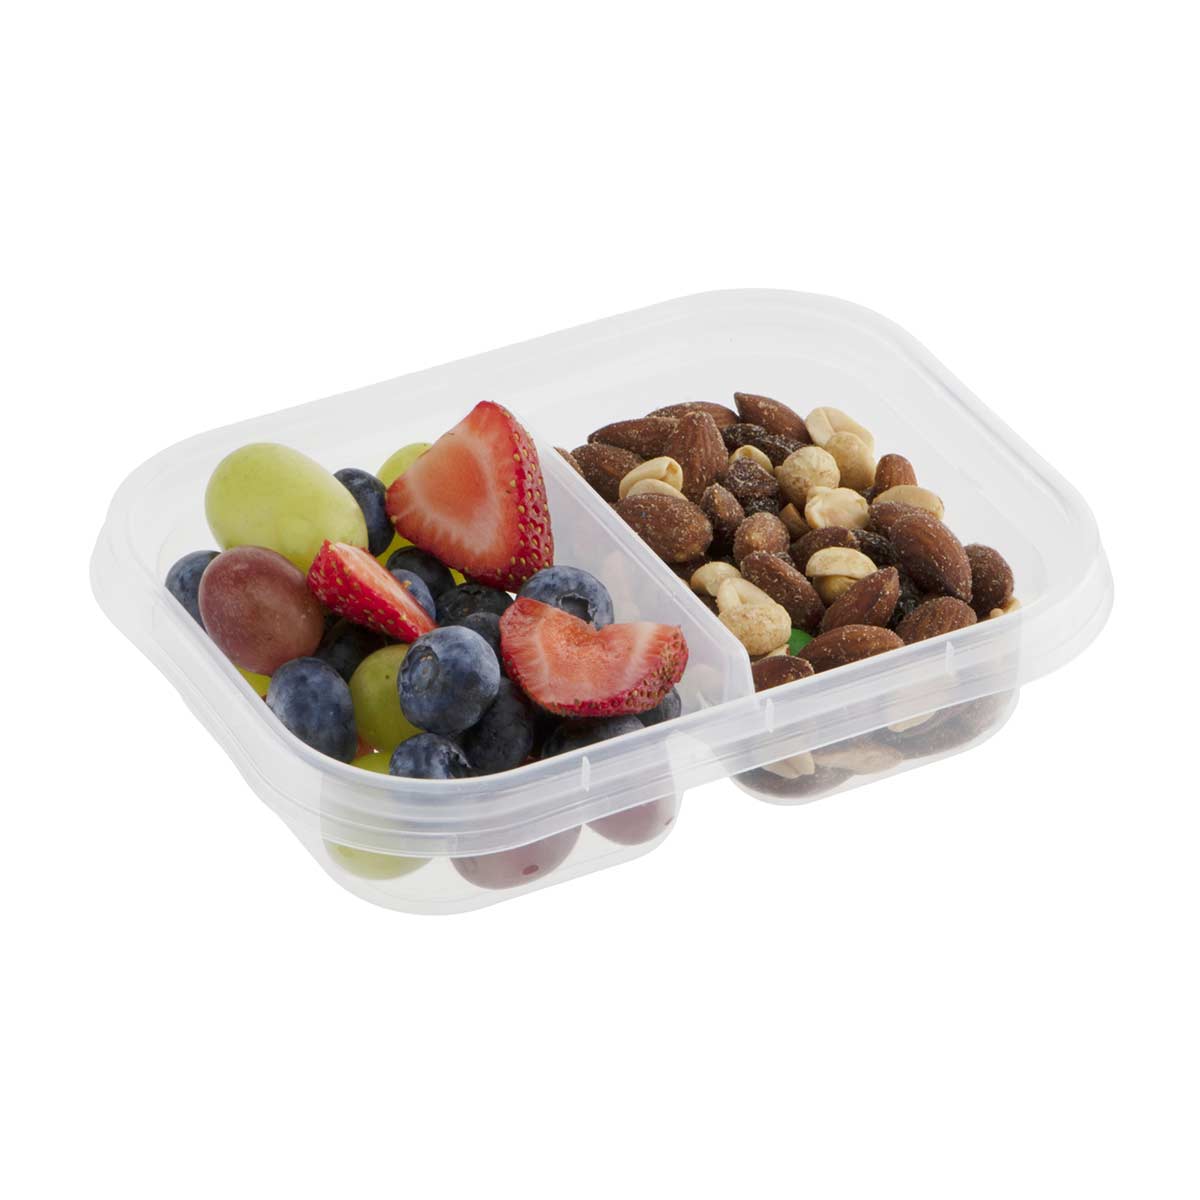 https://www.goodcook.com/media/catalog/product/g/o/goodcook-everyware-snack-pack-container-004.jpg?auto=webp&format=pjpg